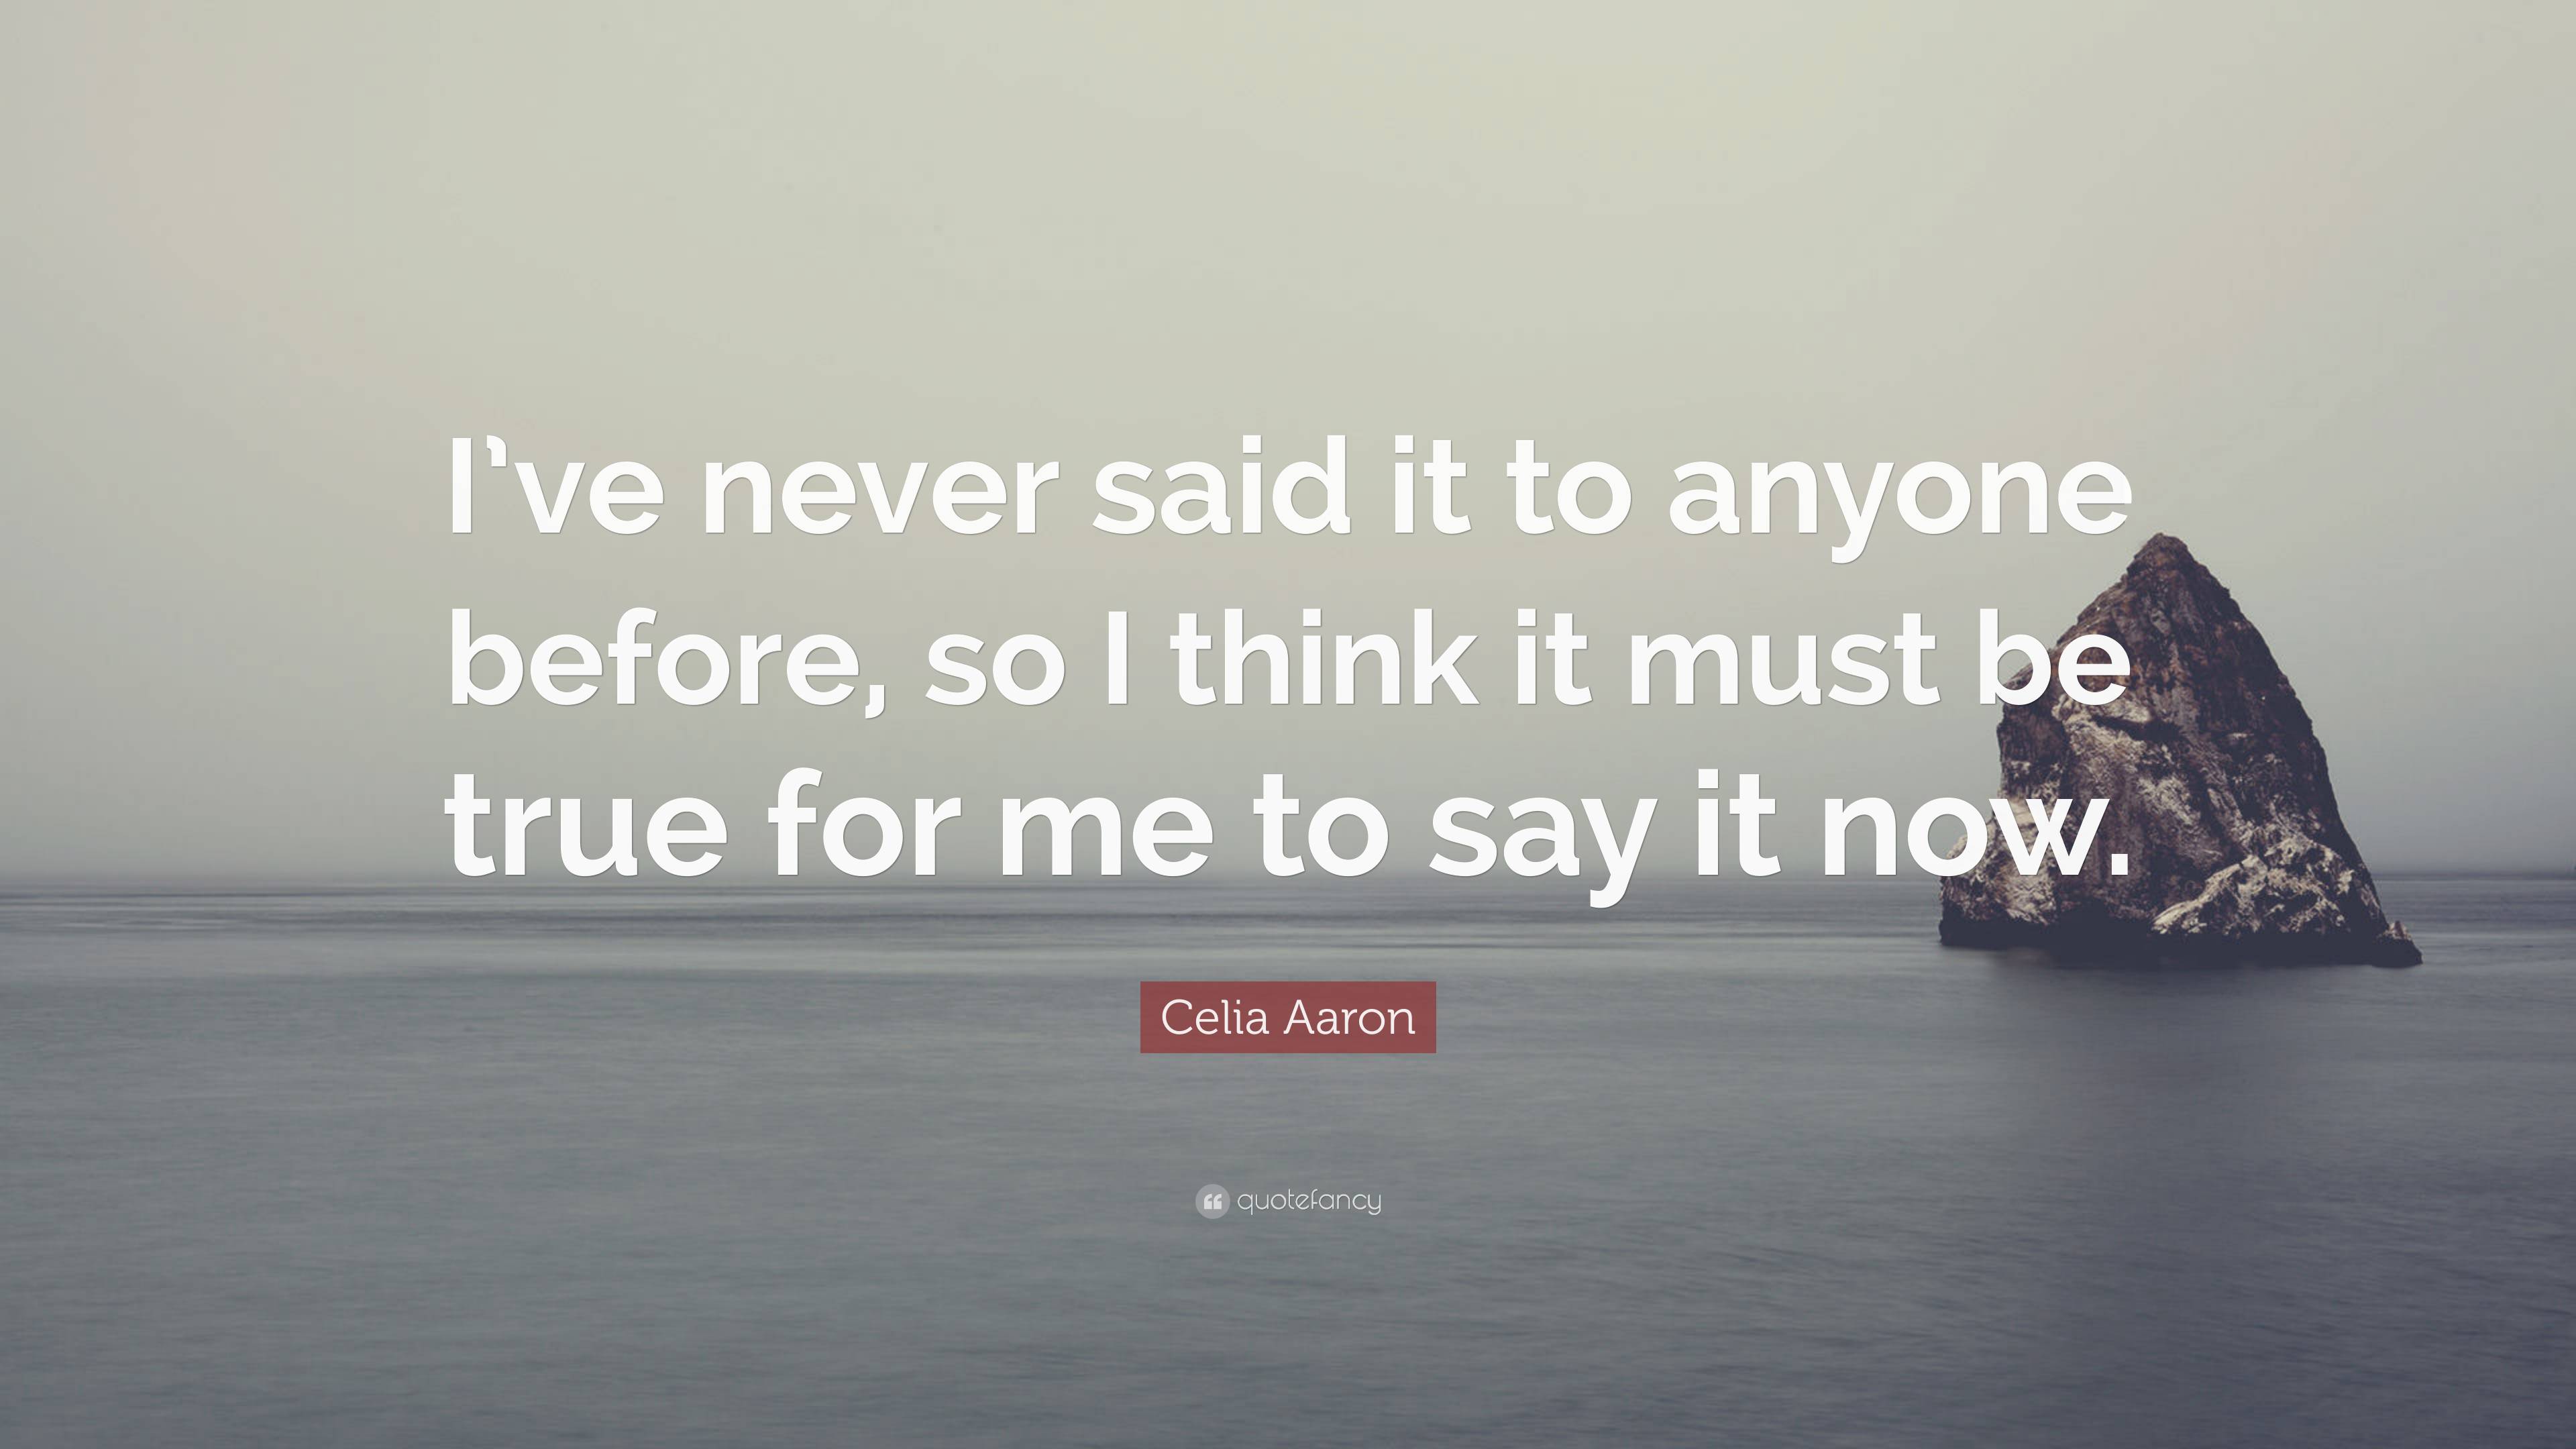 Celia Aaron Quote: “I've never said it to anyone before, so I think it must